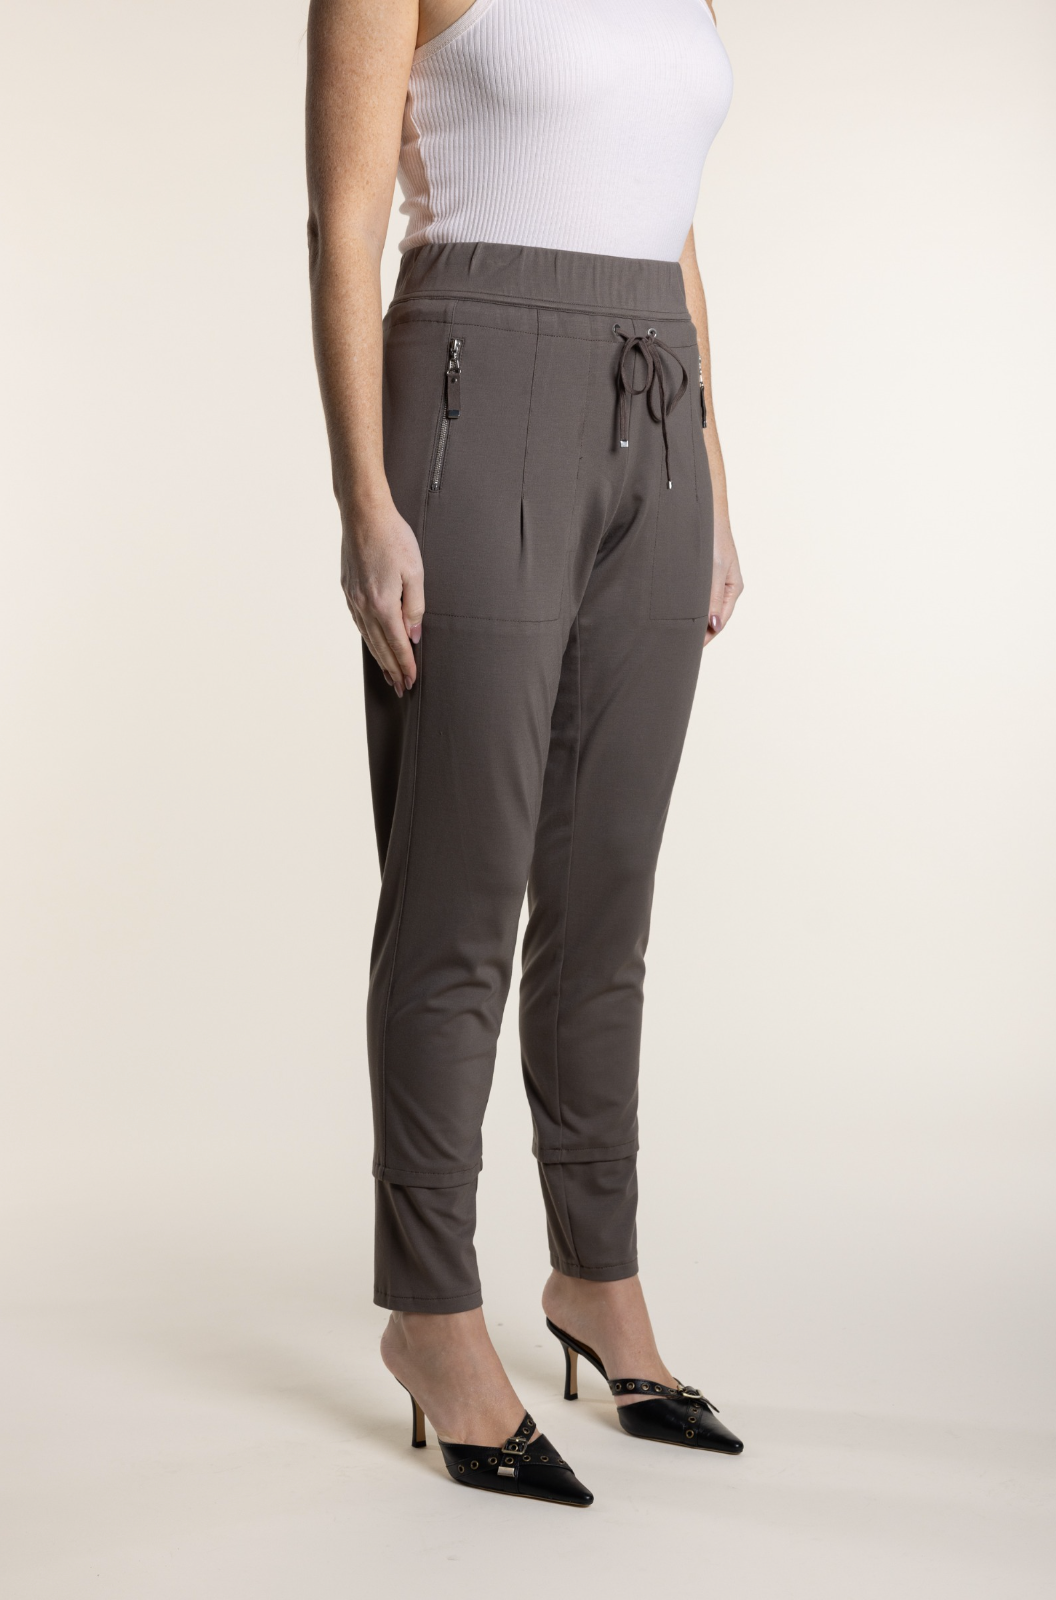 Two-T's Clothing Zip Panel Pant in Clove